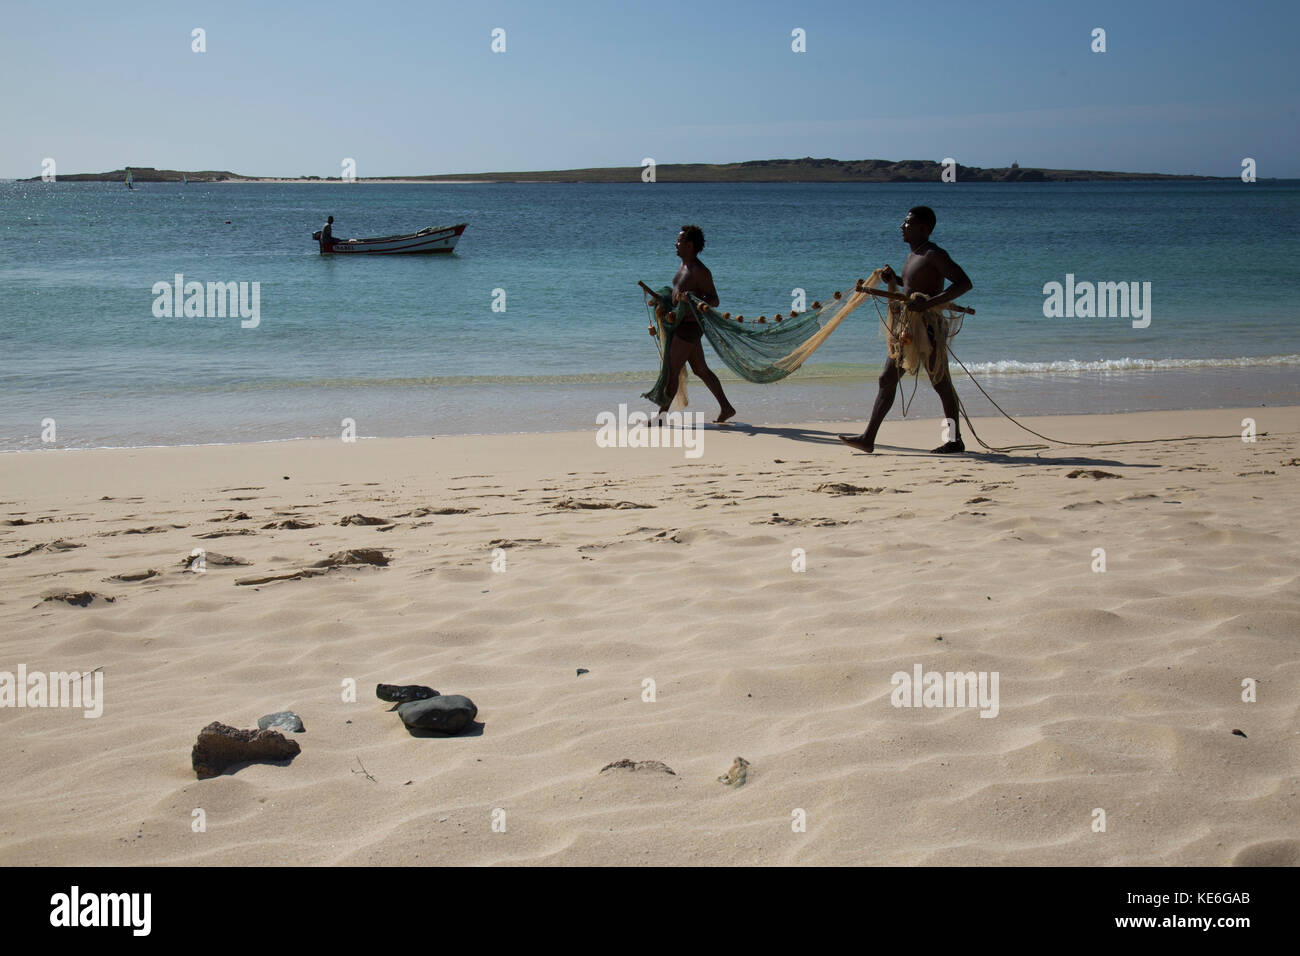 Two fishermen walking on a beach in Cape Verde island holding a